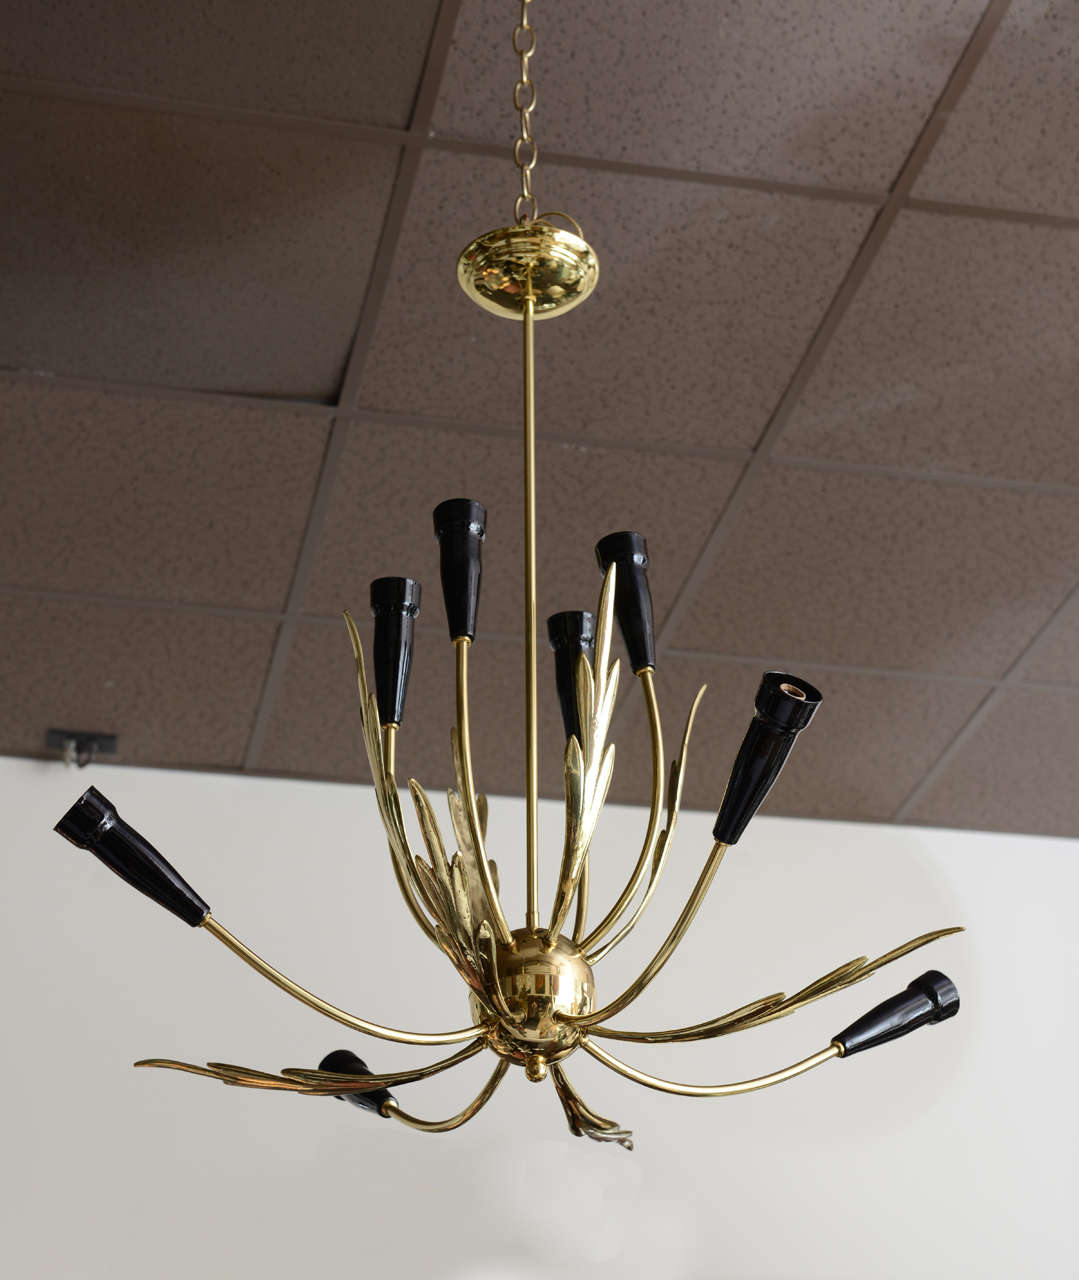 Polished brass leaves and arms with painted black tips, this eight-light chandelier will make a whimsical yet elegant source of light. Rewired.